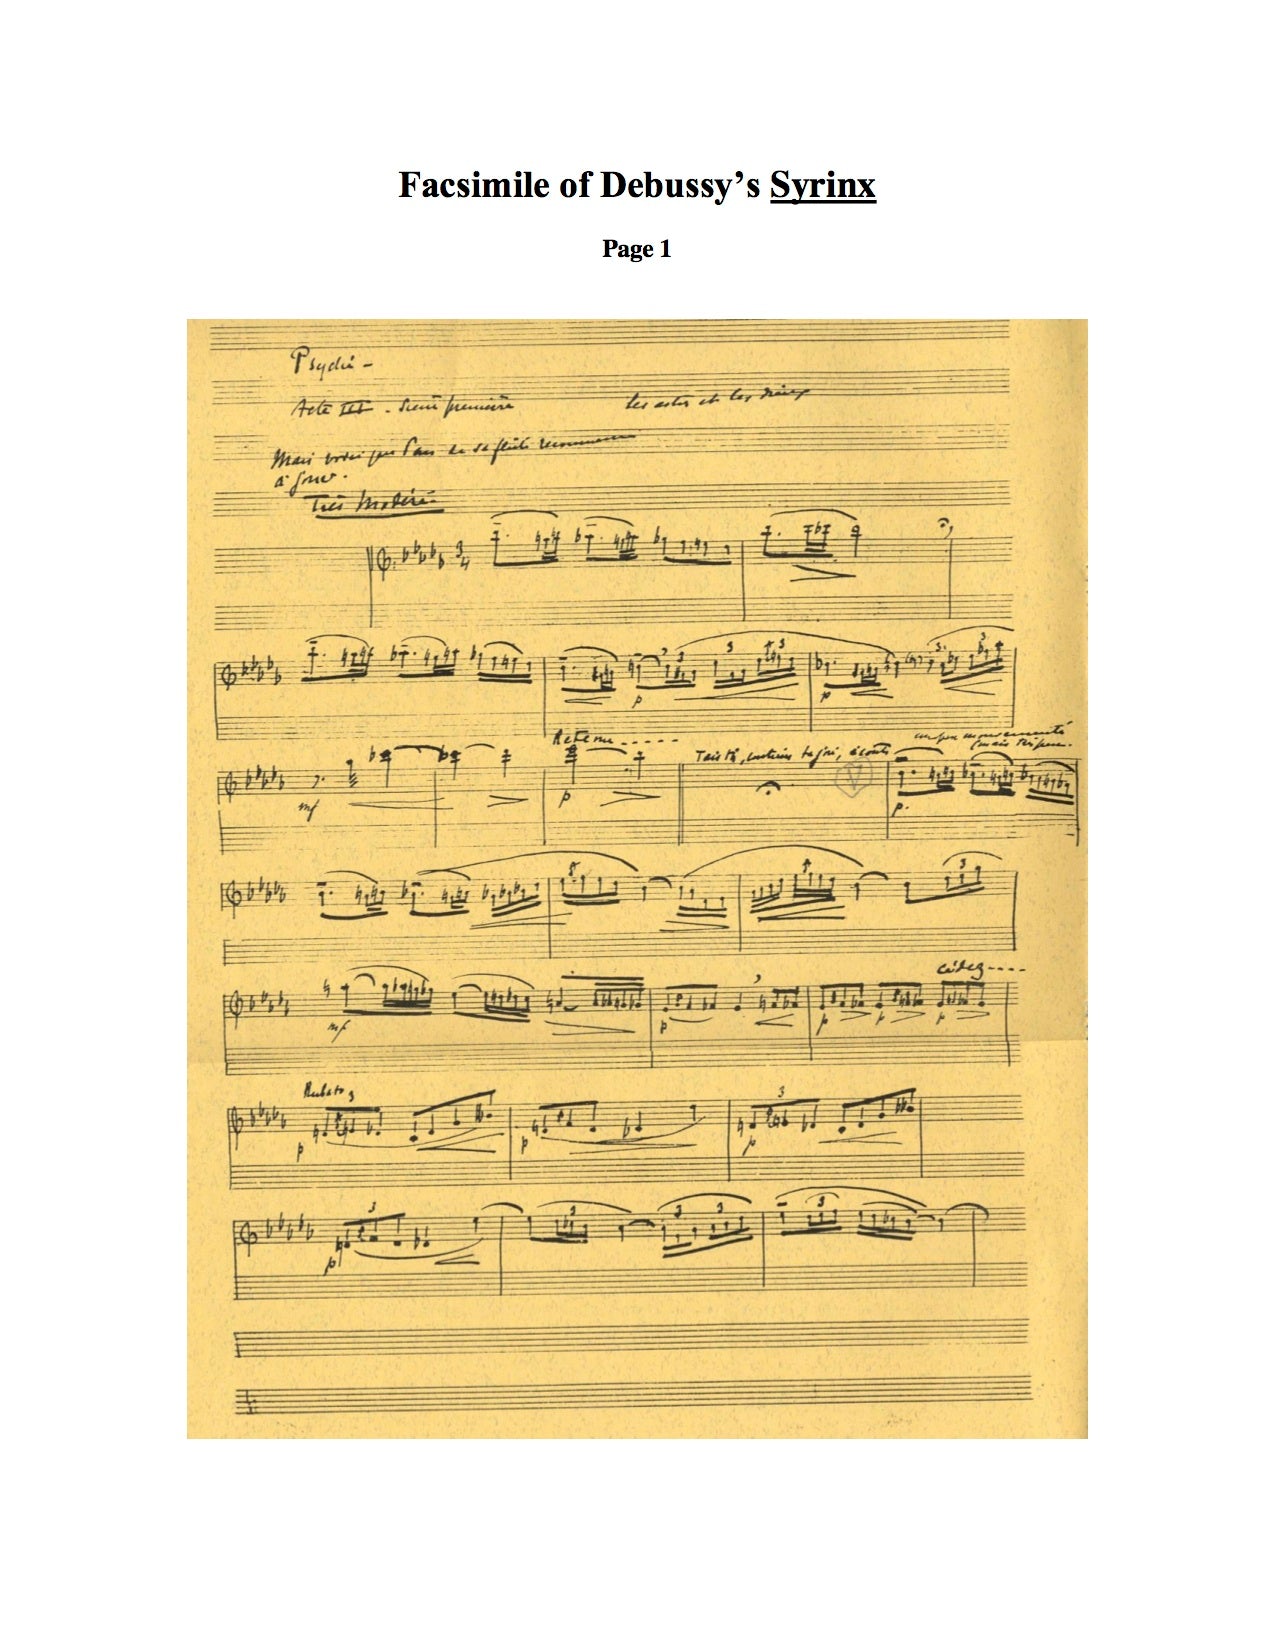 Celebrated Works for Flute By French Composers Edited by Dr. Robin B. Fellows